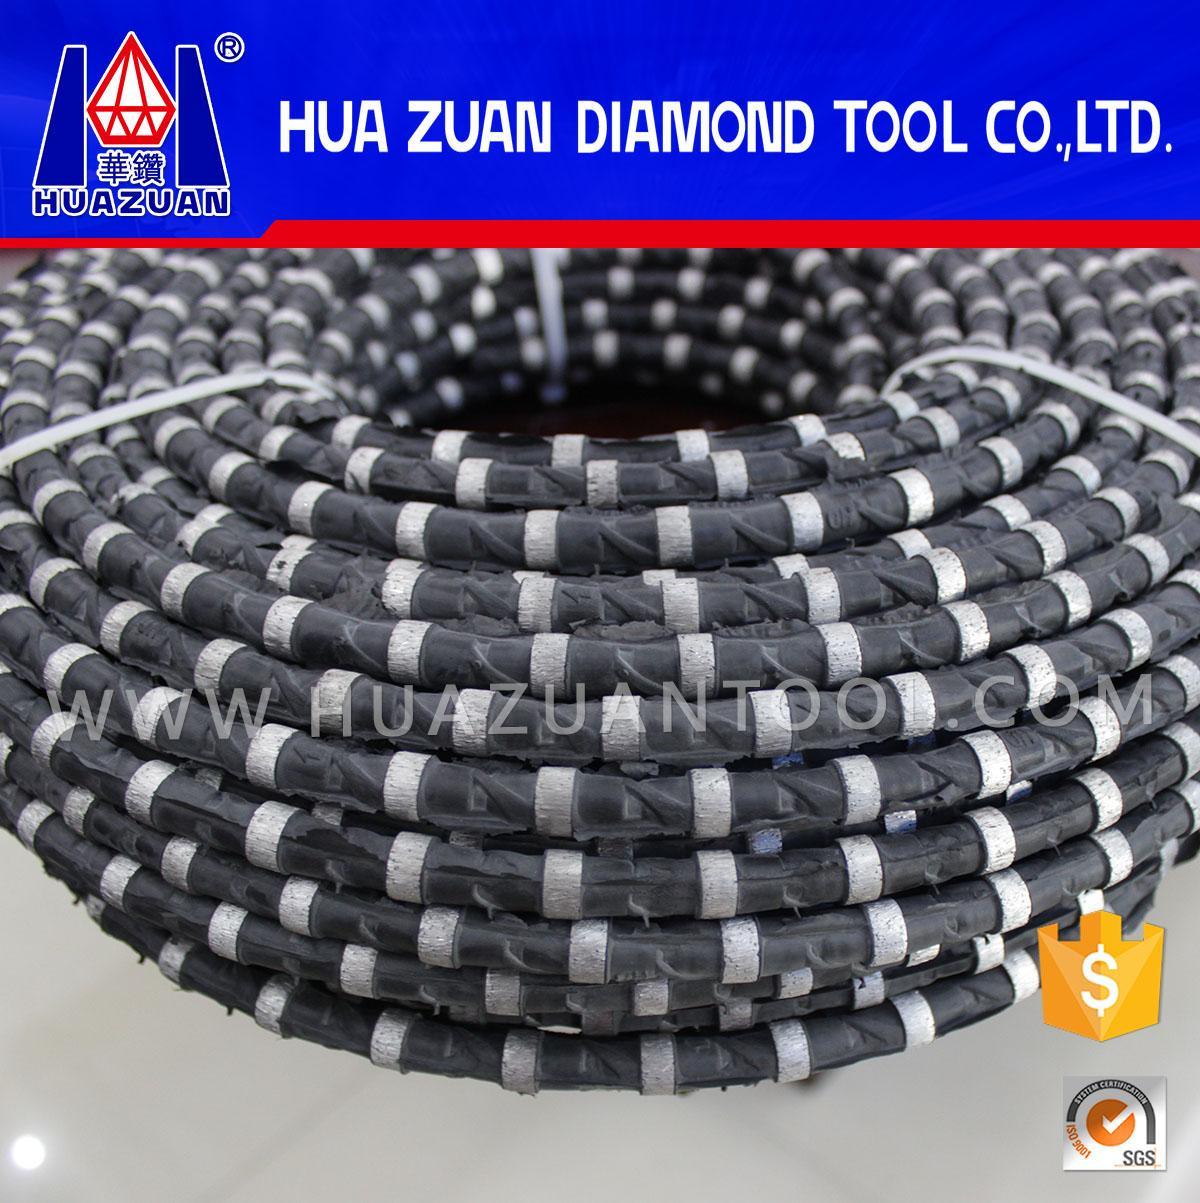 2015 New Recommend Diamond Wire Saw for Quarry